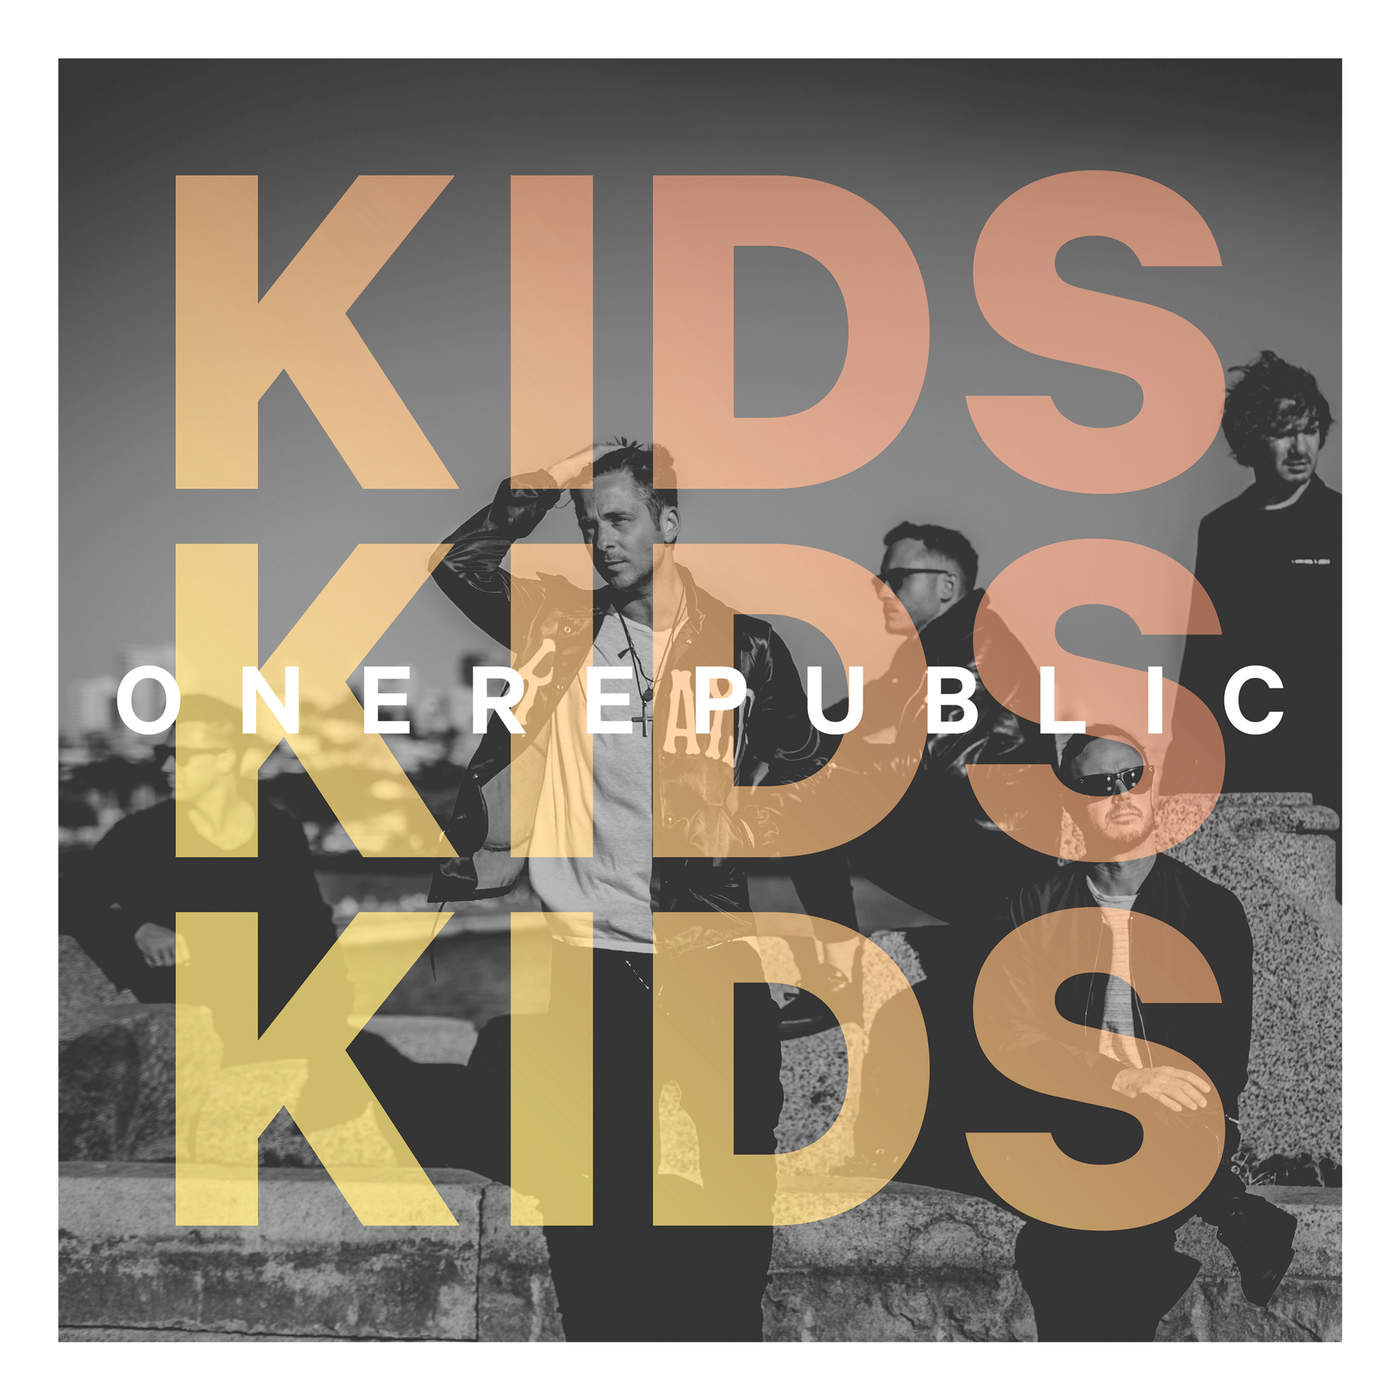 OneRepublic - Kids [Mastered for iTunes] (US Store) (2016) - Single [iTunes Plus AAC M4A]